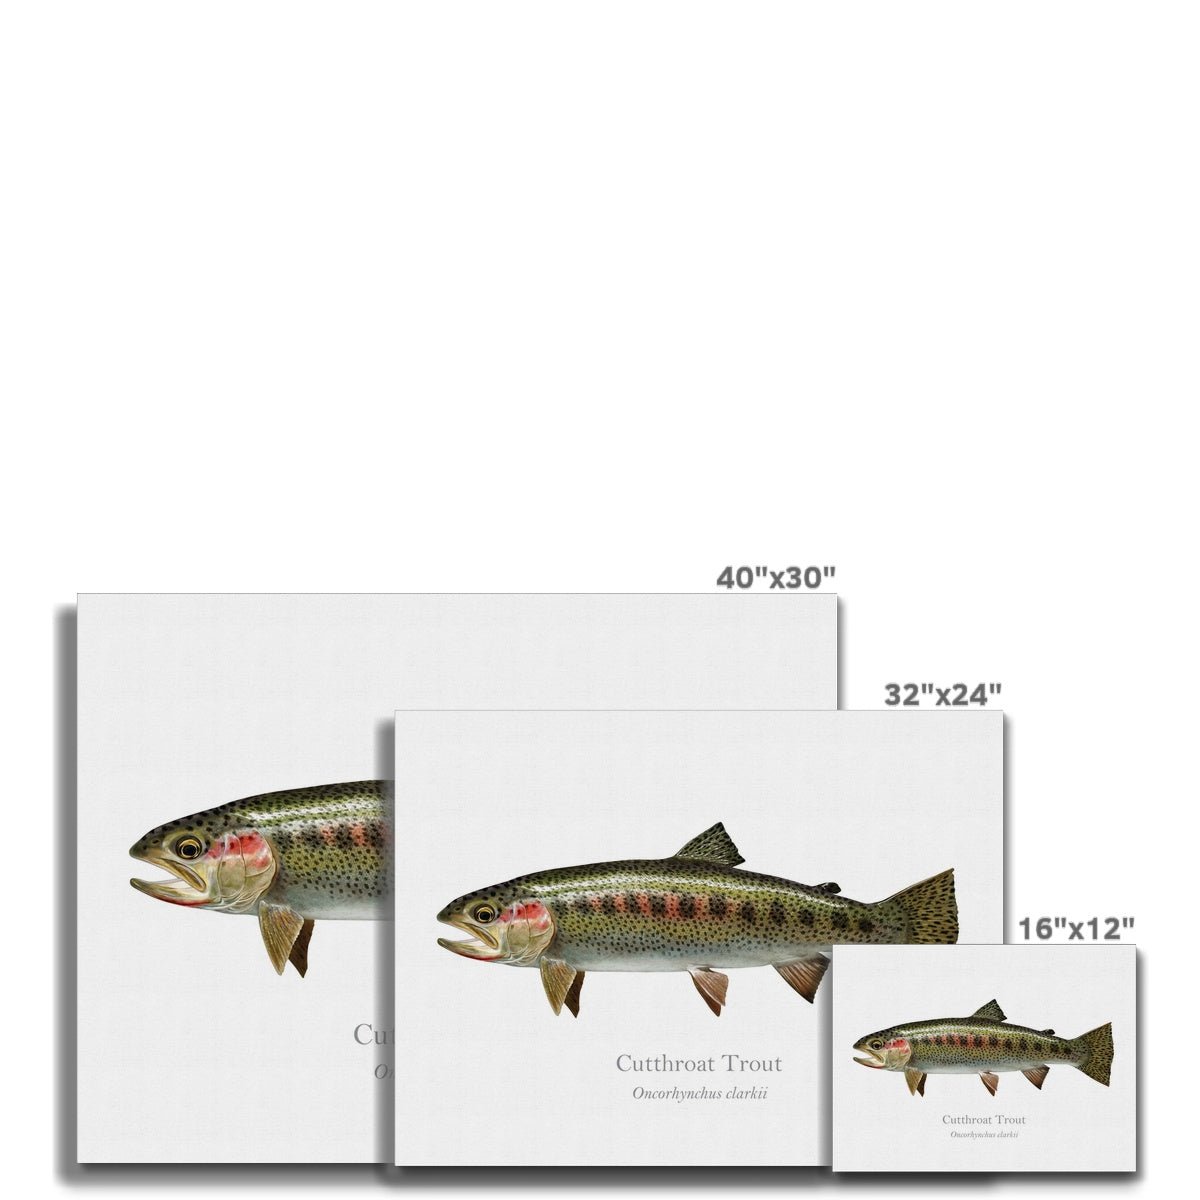 Cutthroat Trout - Canvas Print - With Scientific Name - madfishlab.com